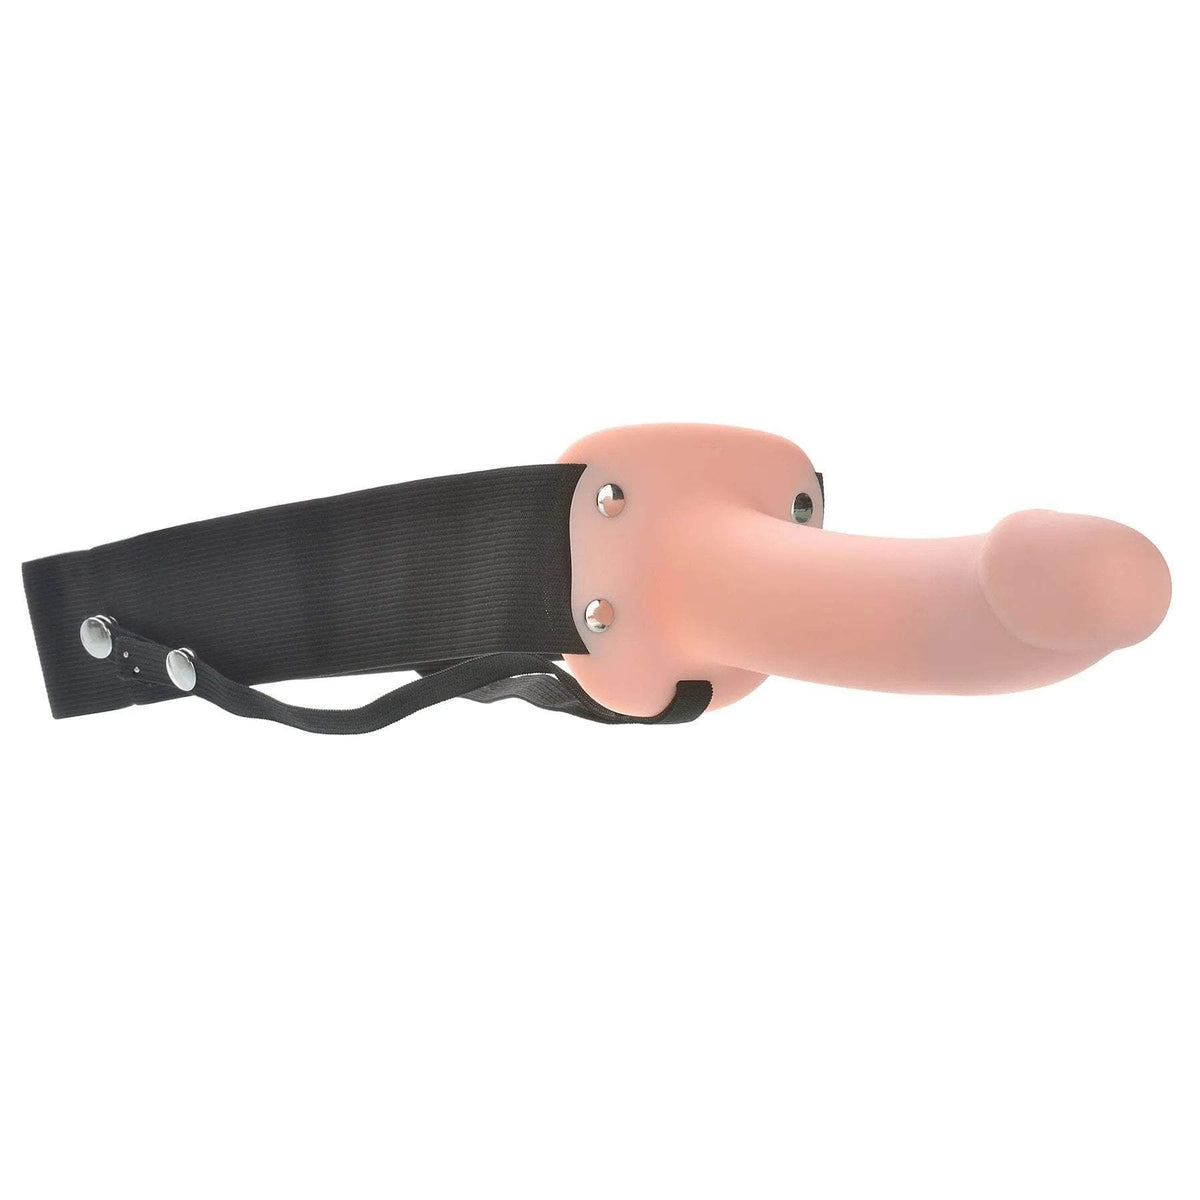 Flexskin Hollow Strap on Penis Extension Sleeve (6.5 inch) by Adams Cock Sheaths